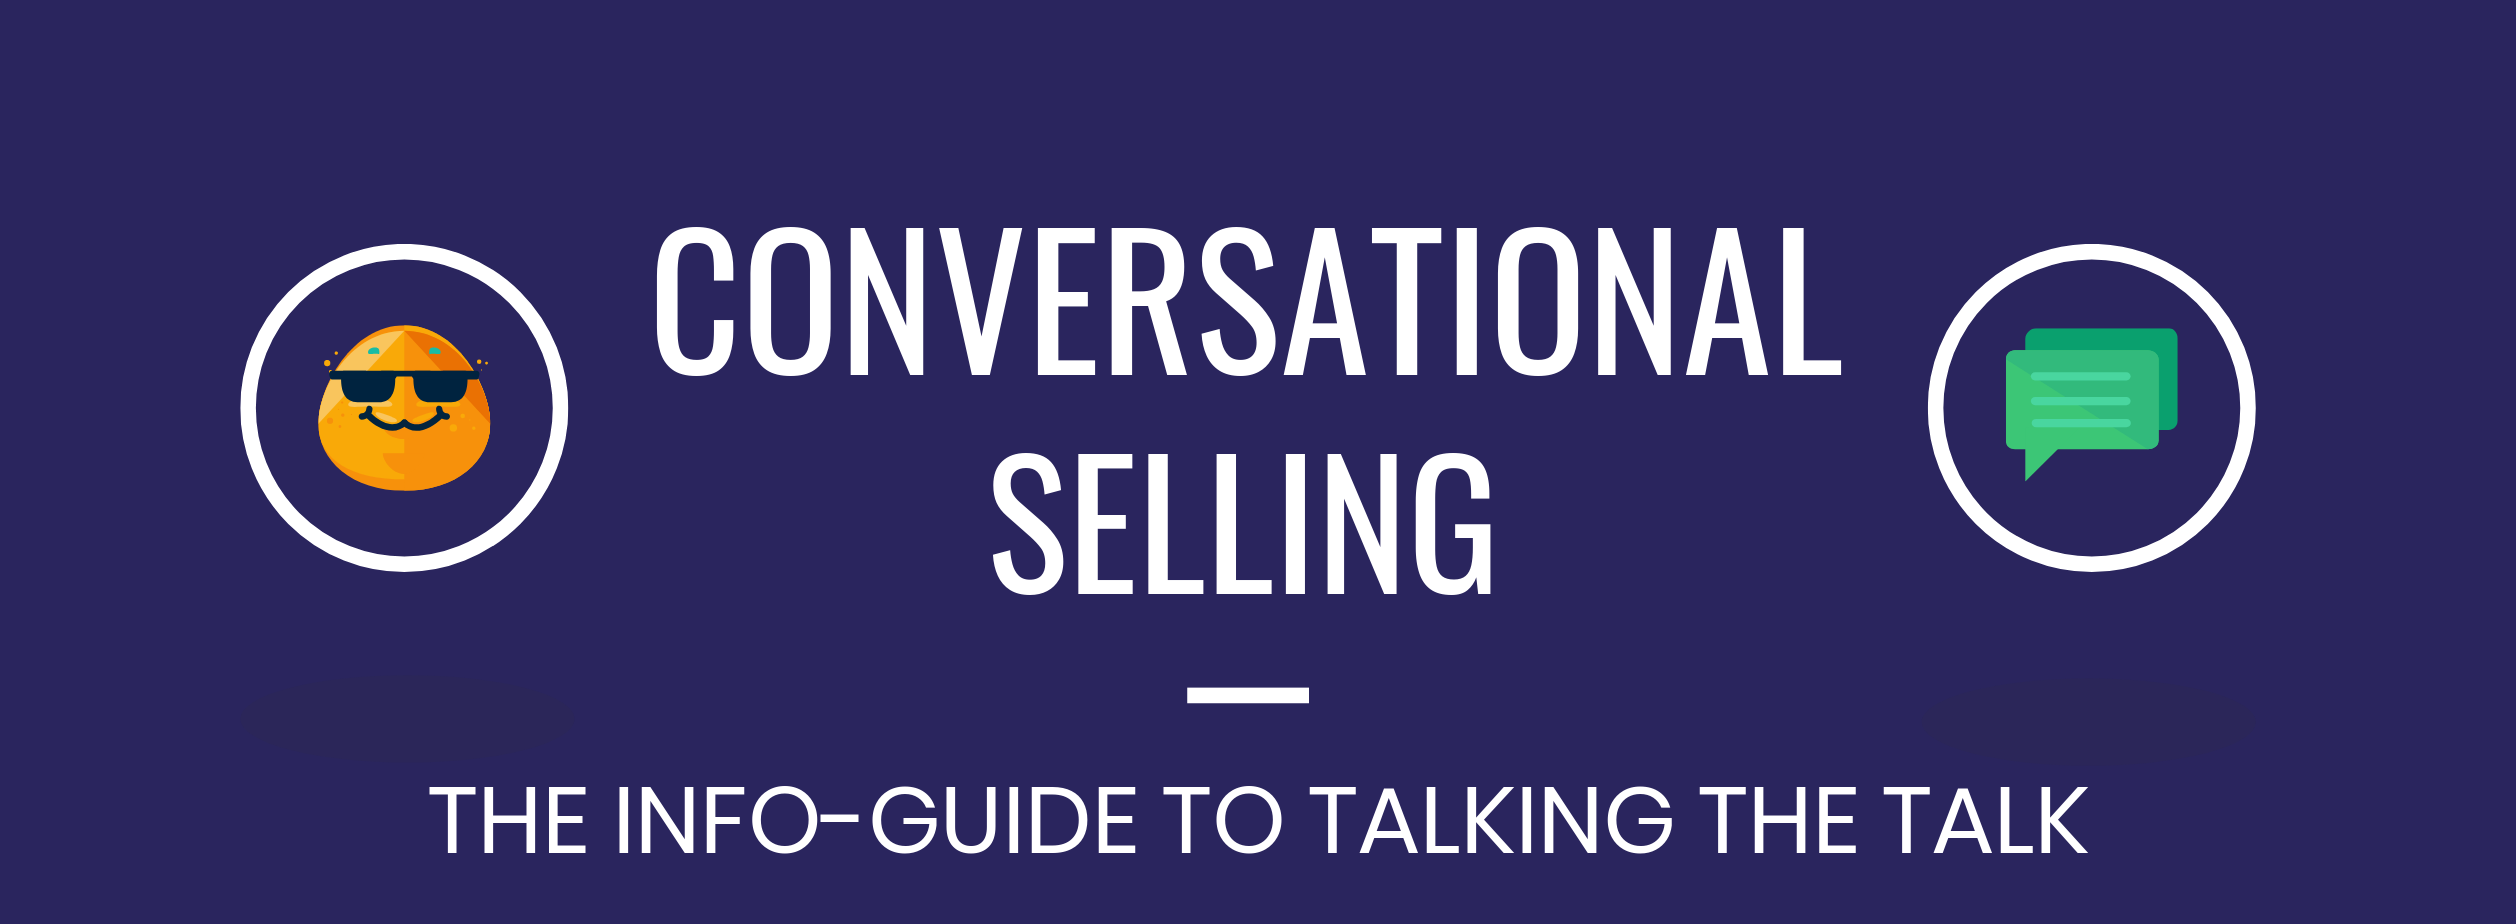 Conversational Selling [Infographic]